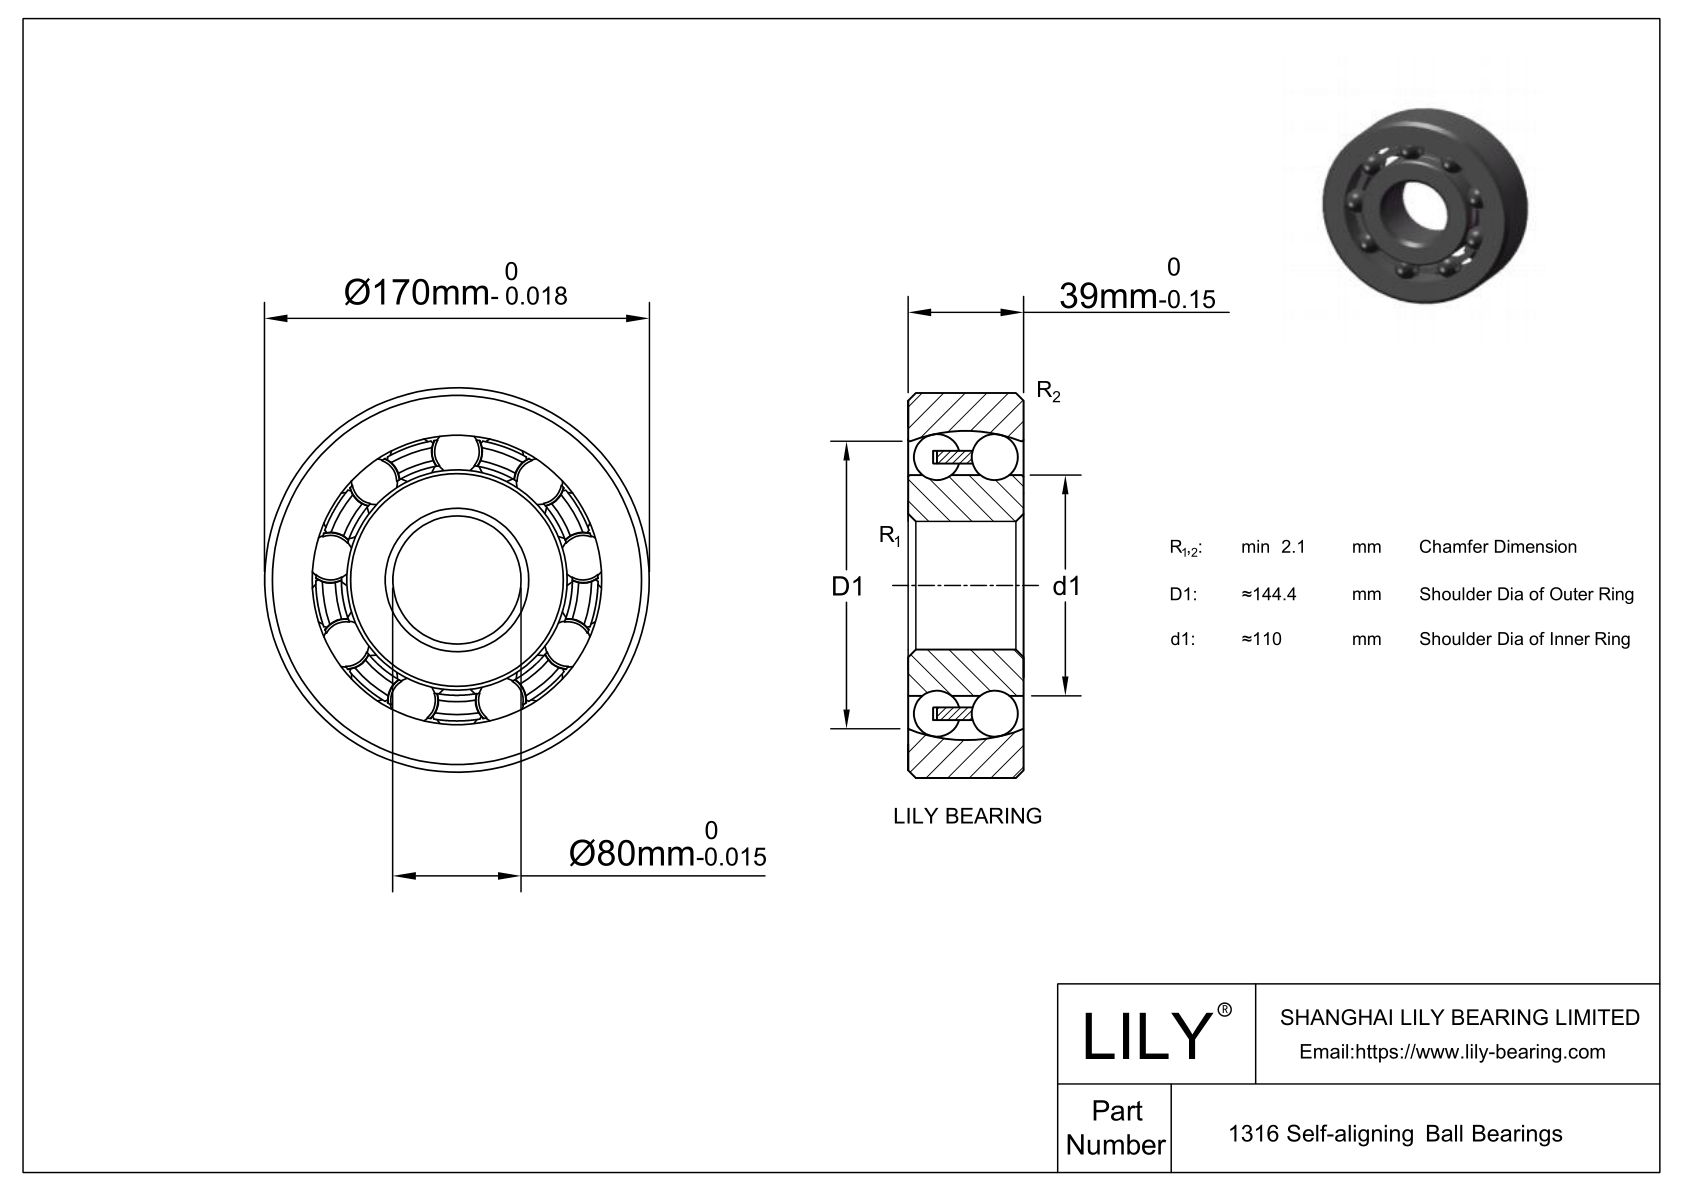 S1316 Stainless Steel Self Aligning Ball Bearings cad drawing